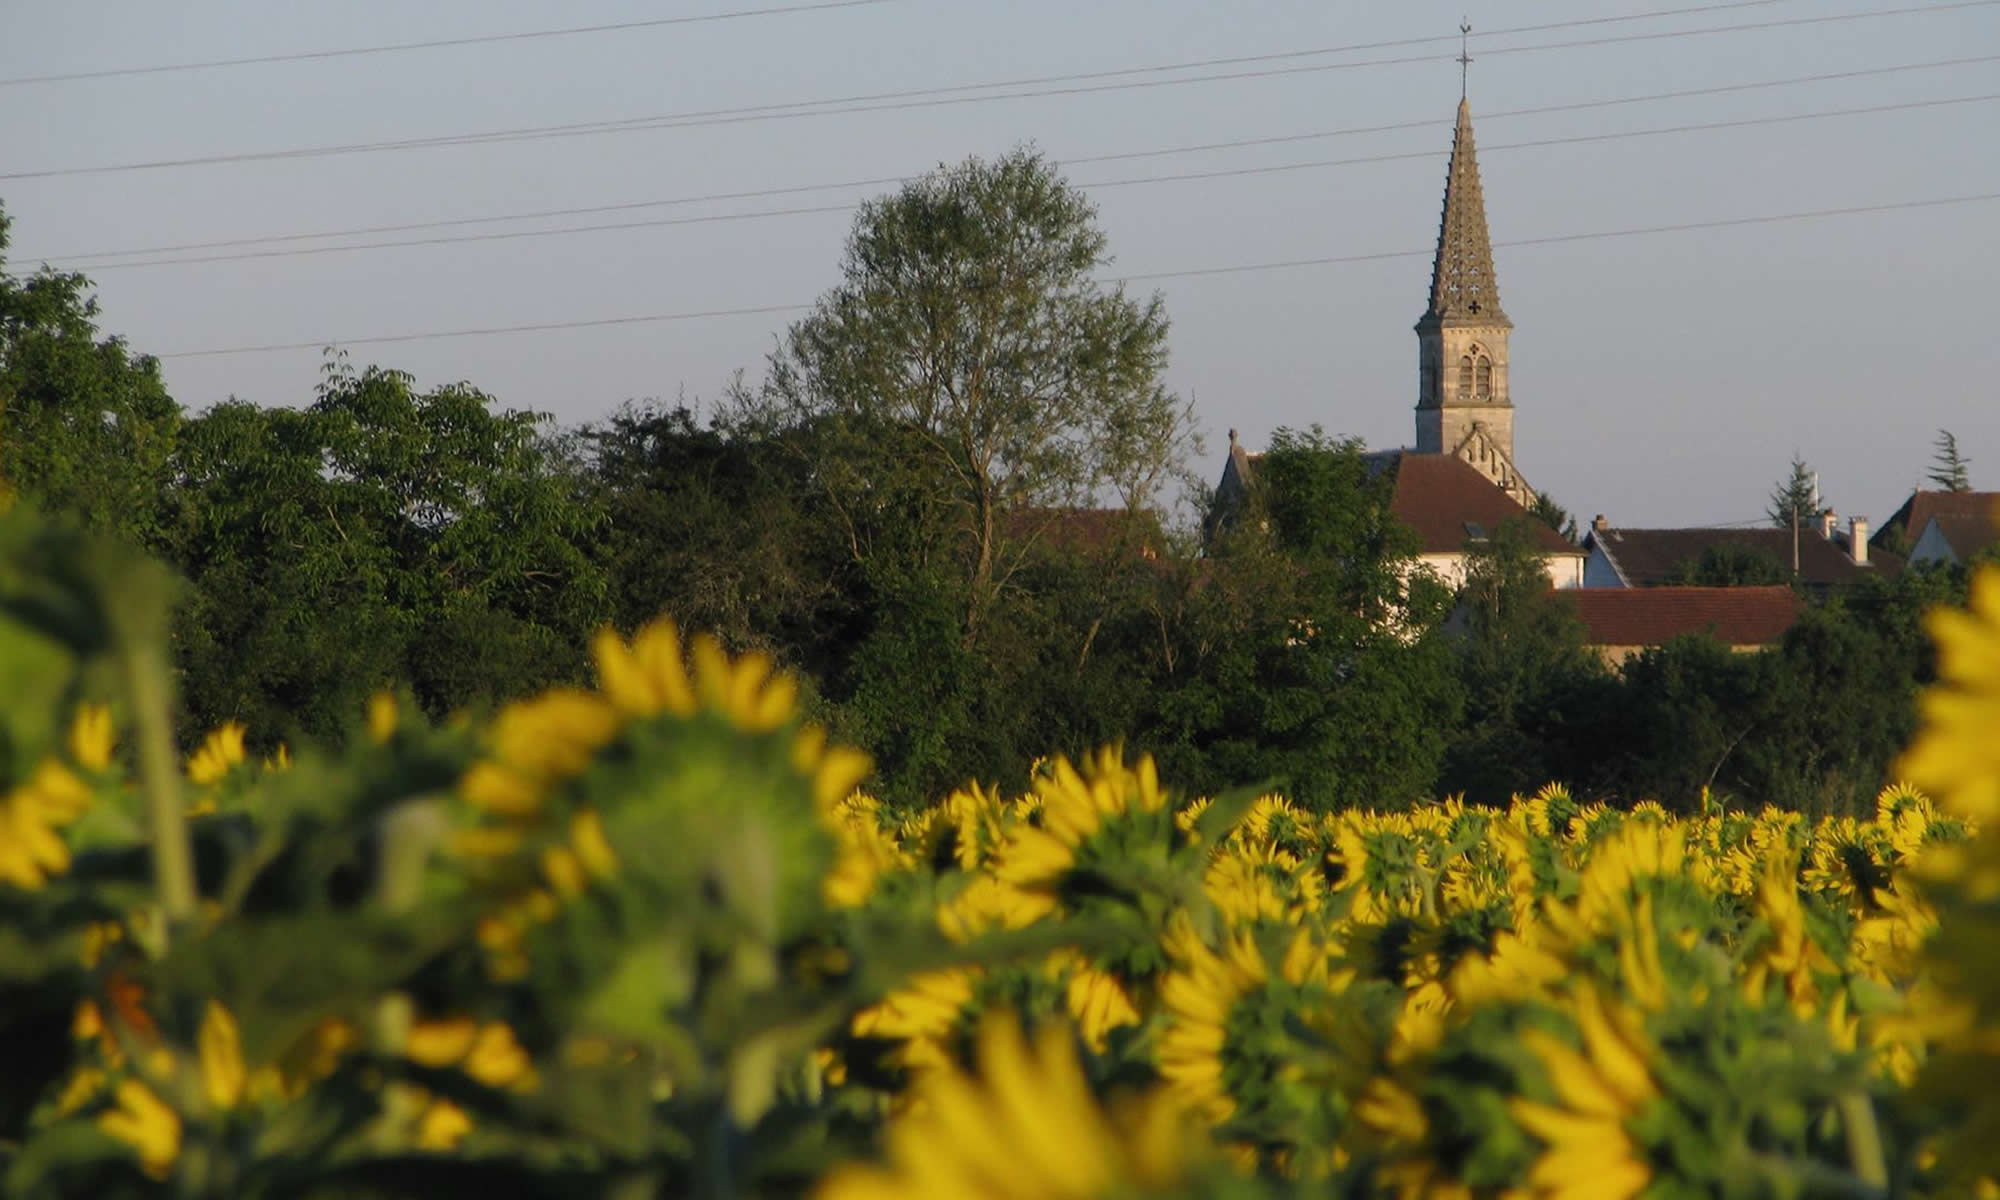 A church steeple rises above a field of sunflowers in France's Burgundy region.